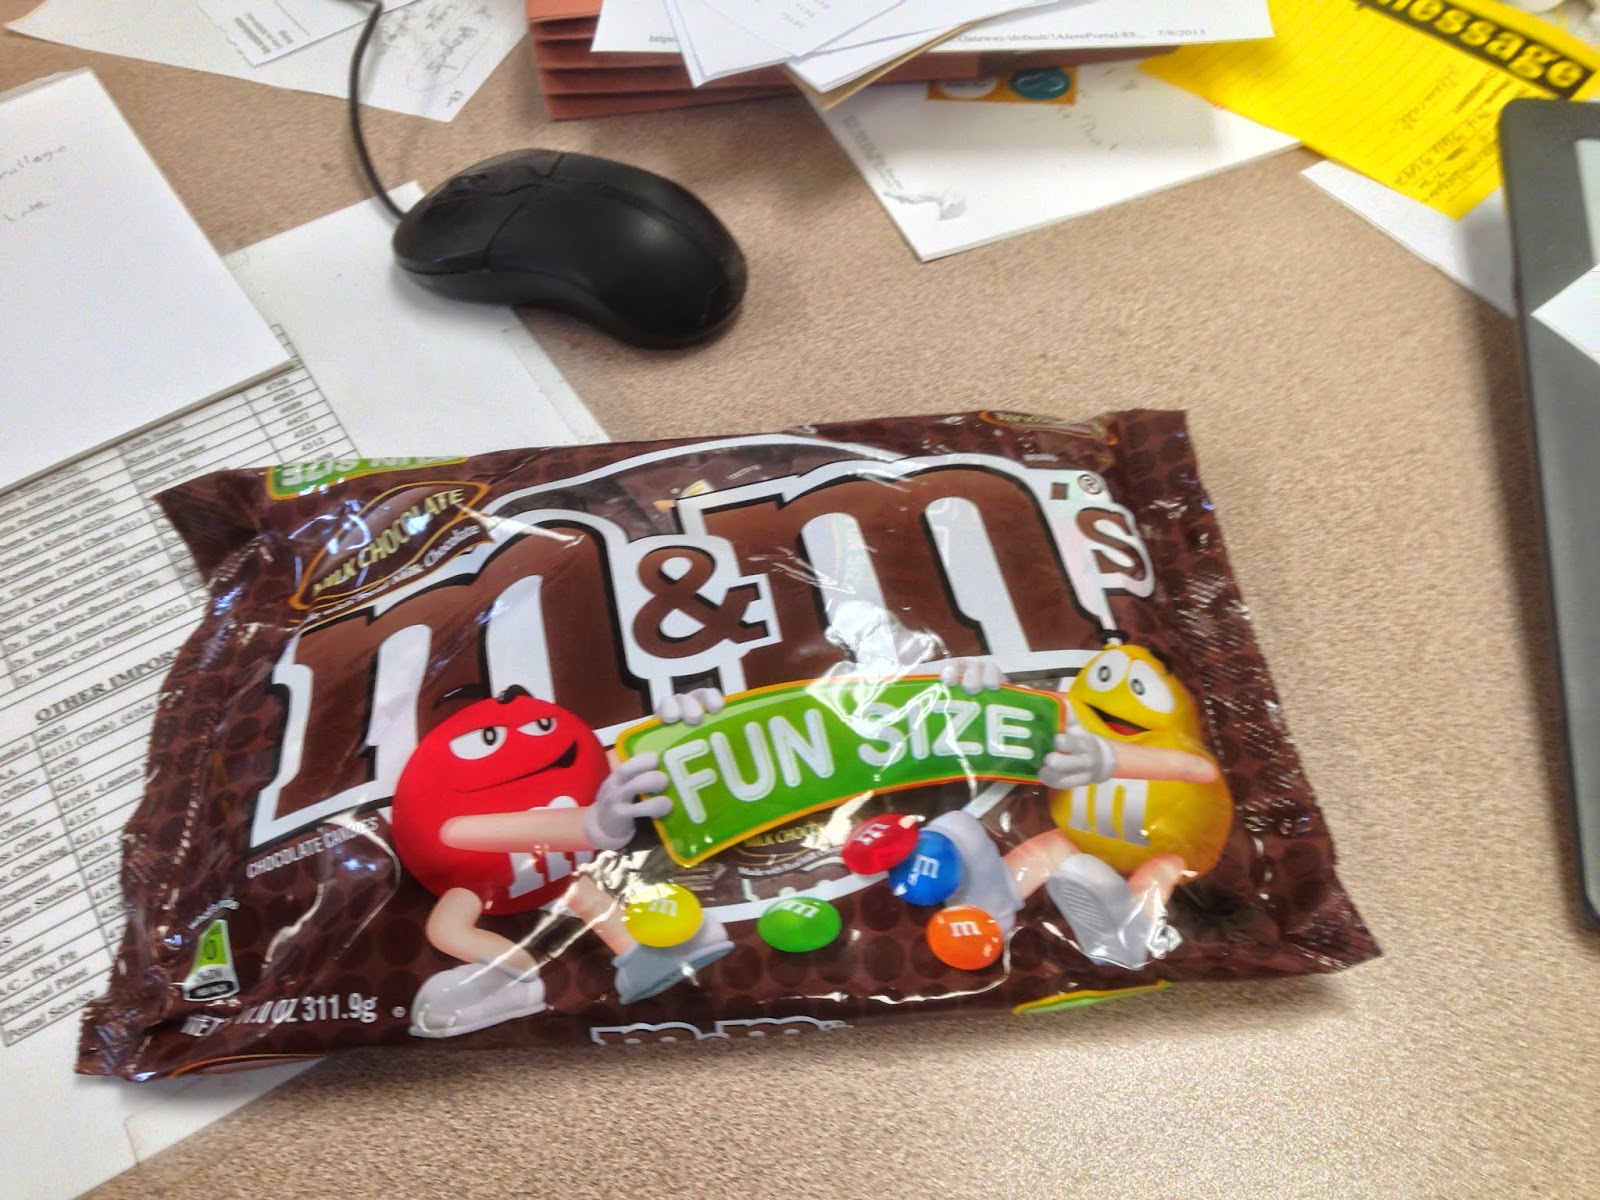 small bag of m&ms